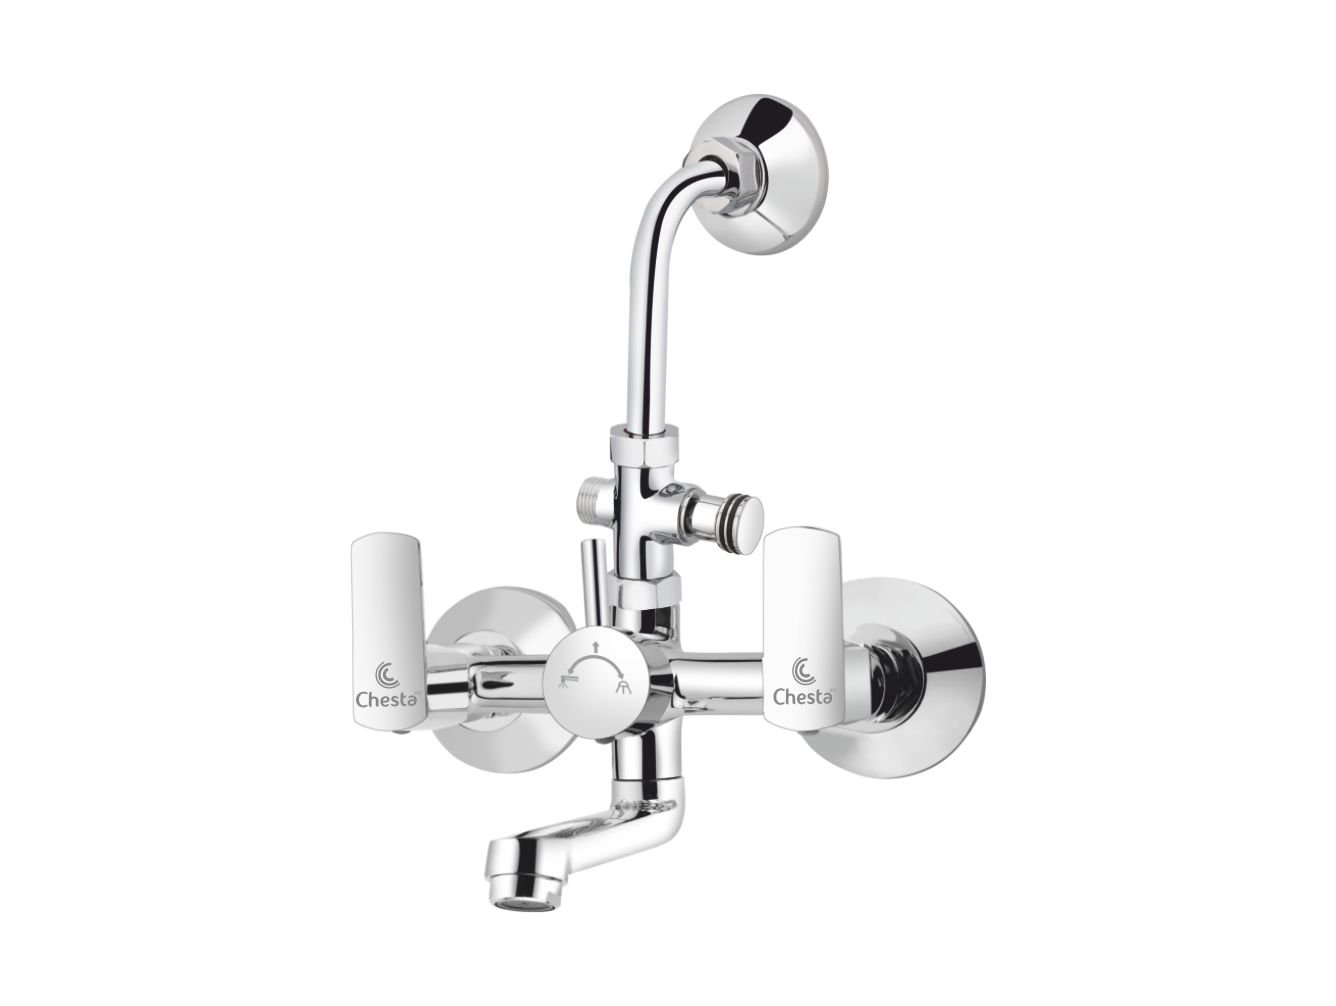 BL - 1020 - Wall Mixer 3 in 1 with L Bend at Chesta Bath Fittings